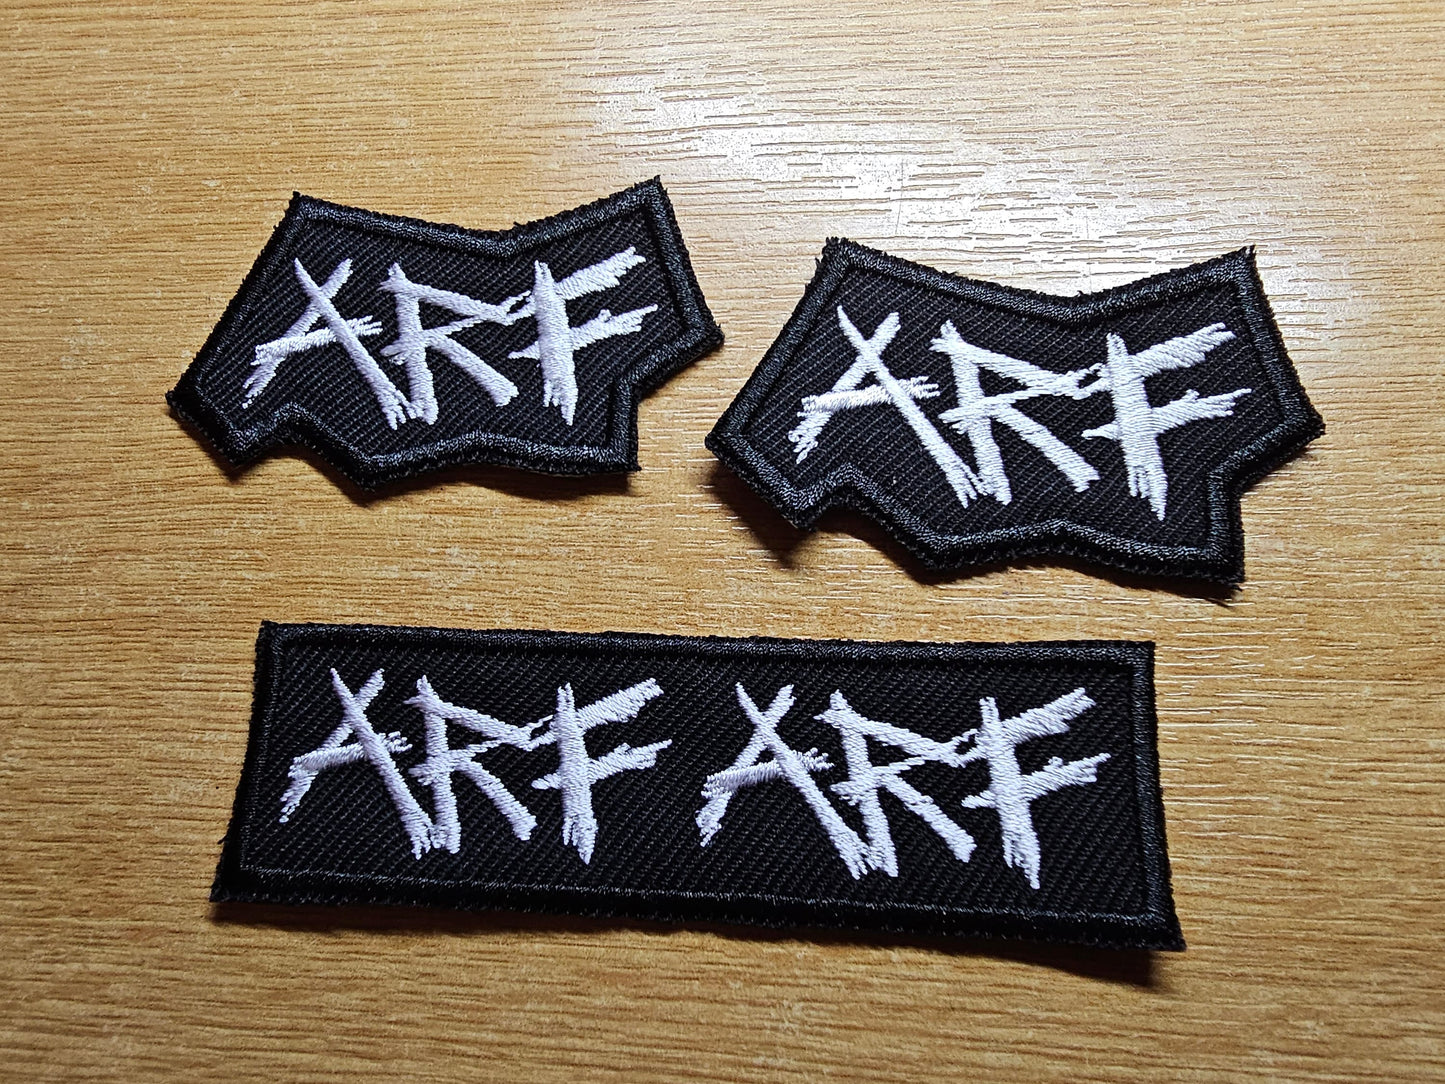 Arf Arf Blegh Metalcore Embroidered Patch Metal Breakdown Emo